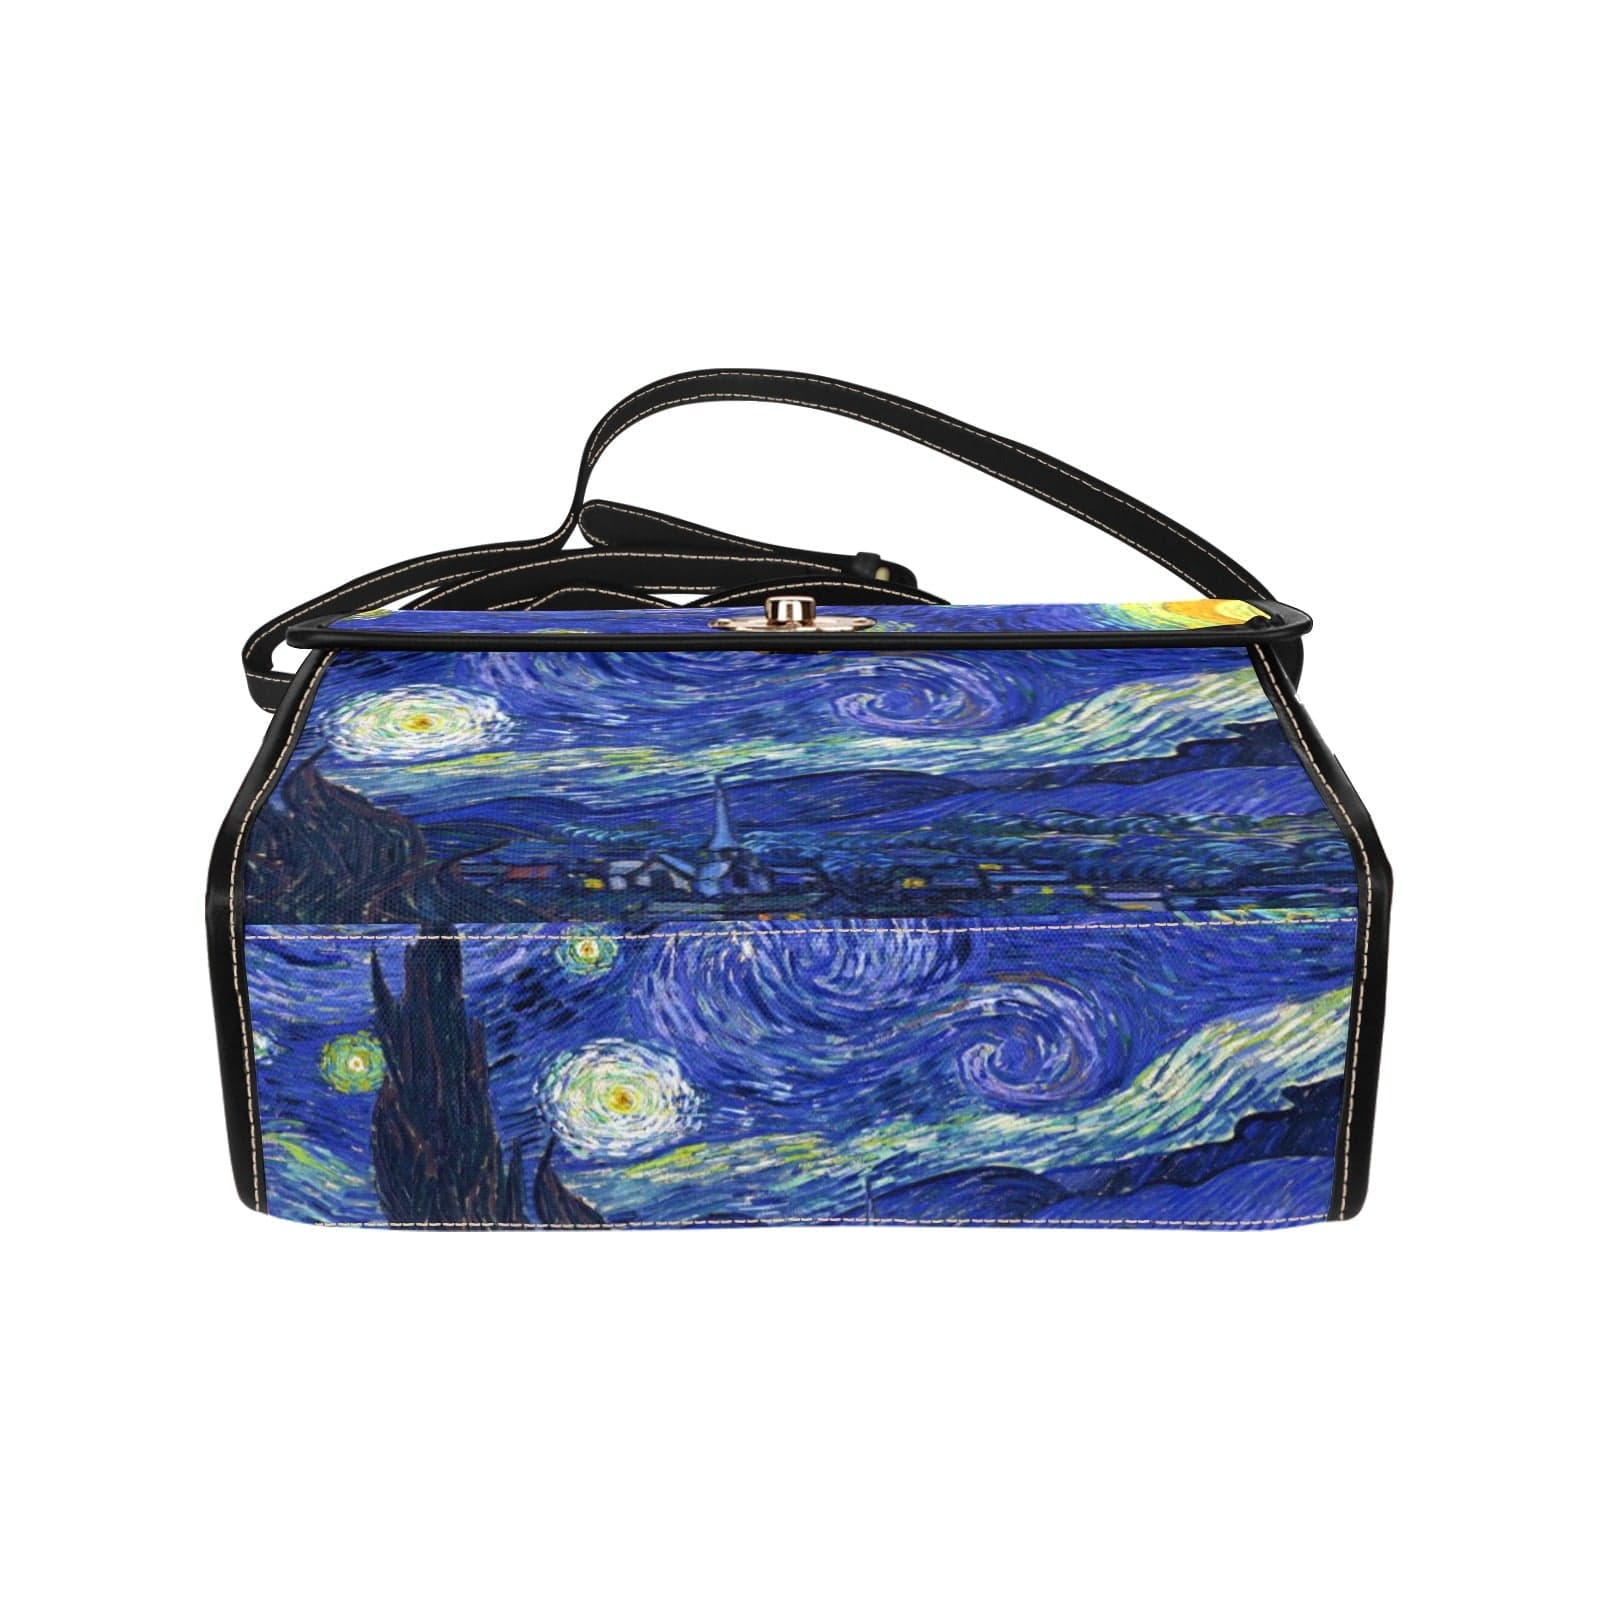 showing the base and high quality stitching and binding on the famous Van Gogh Starry Night printed on a high quality boxy satchel at Gallery Serpentine